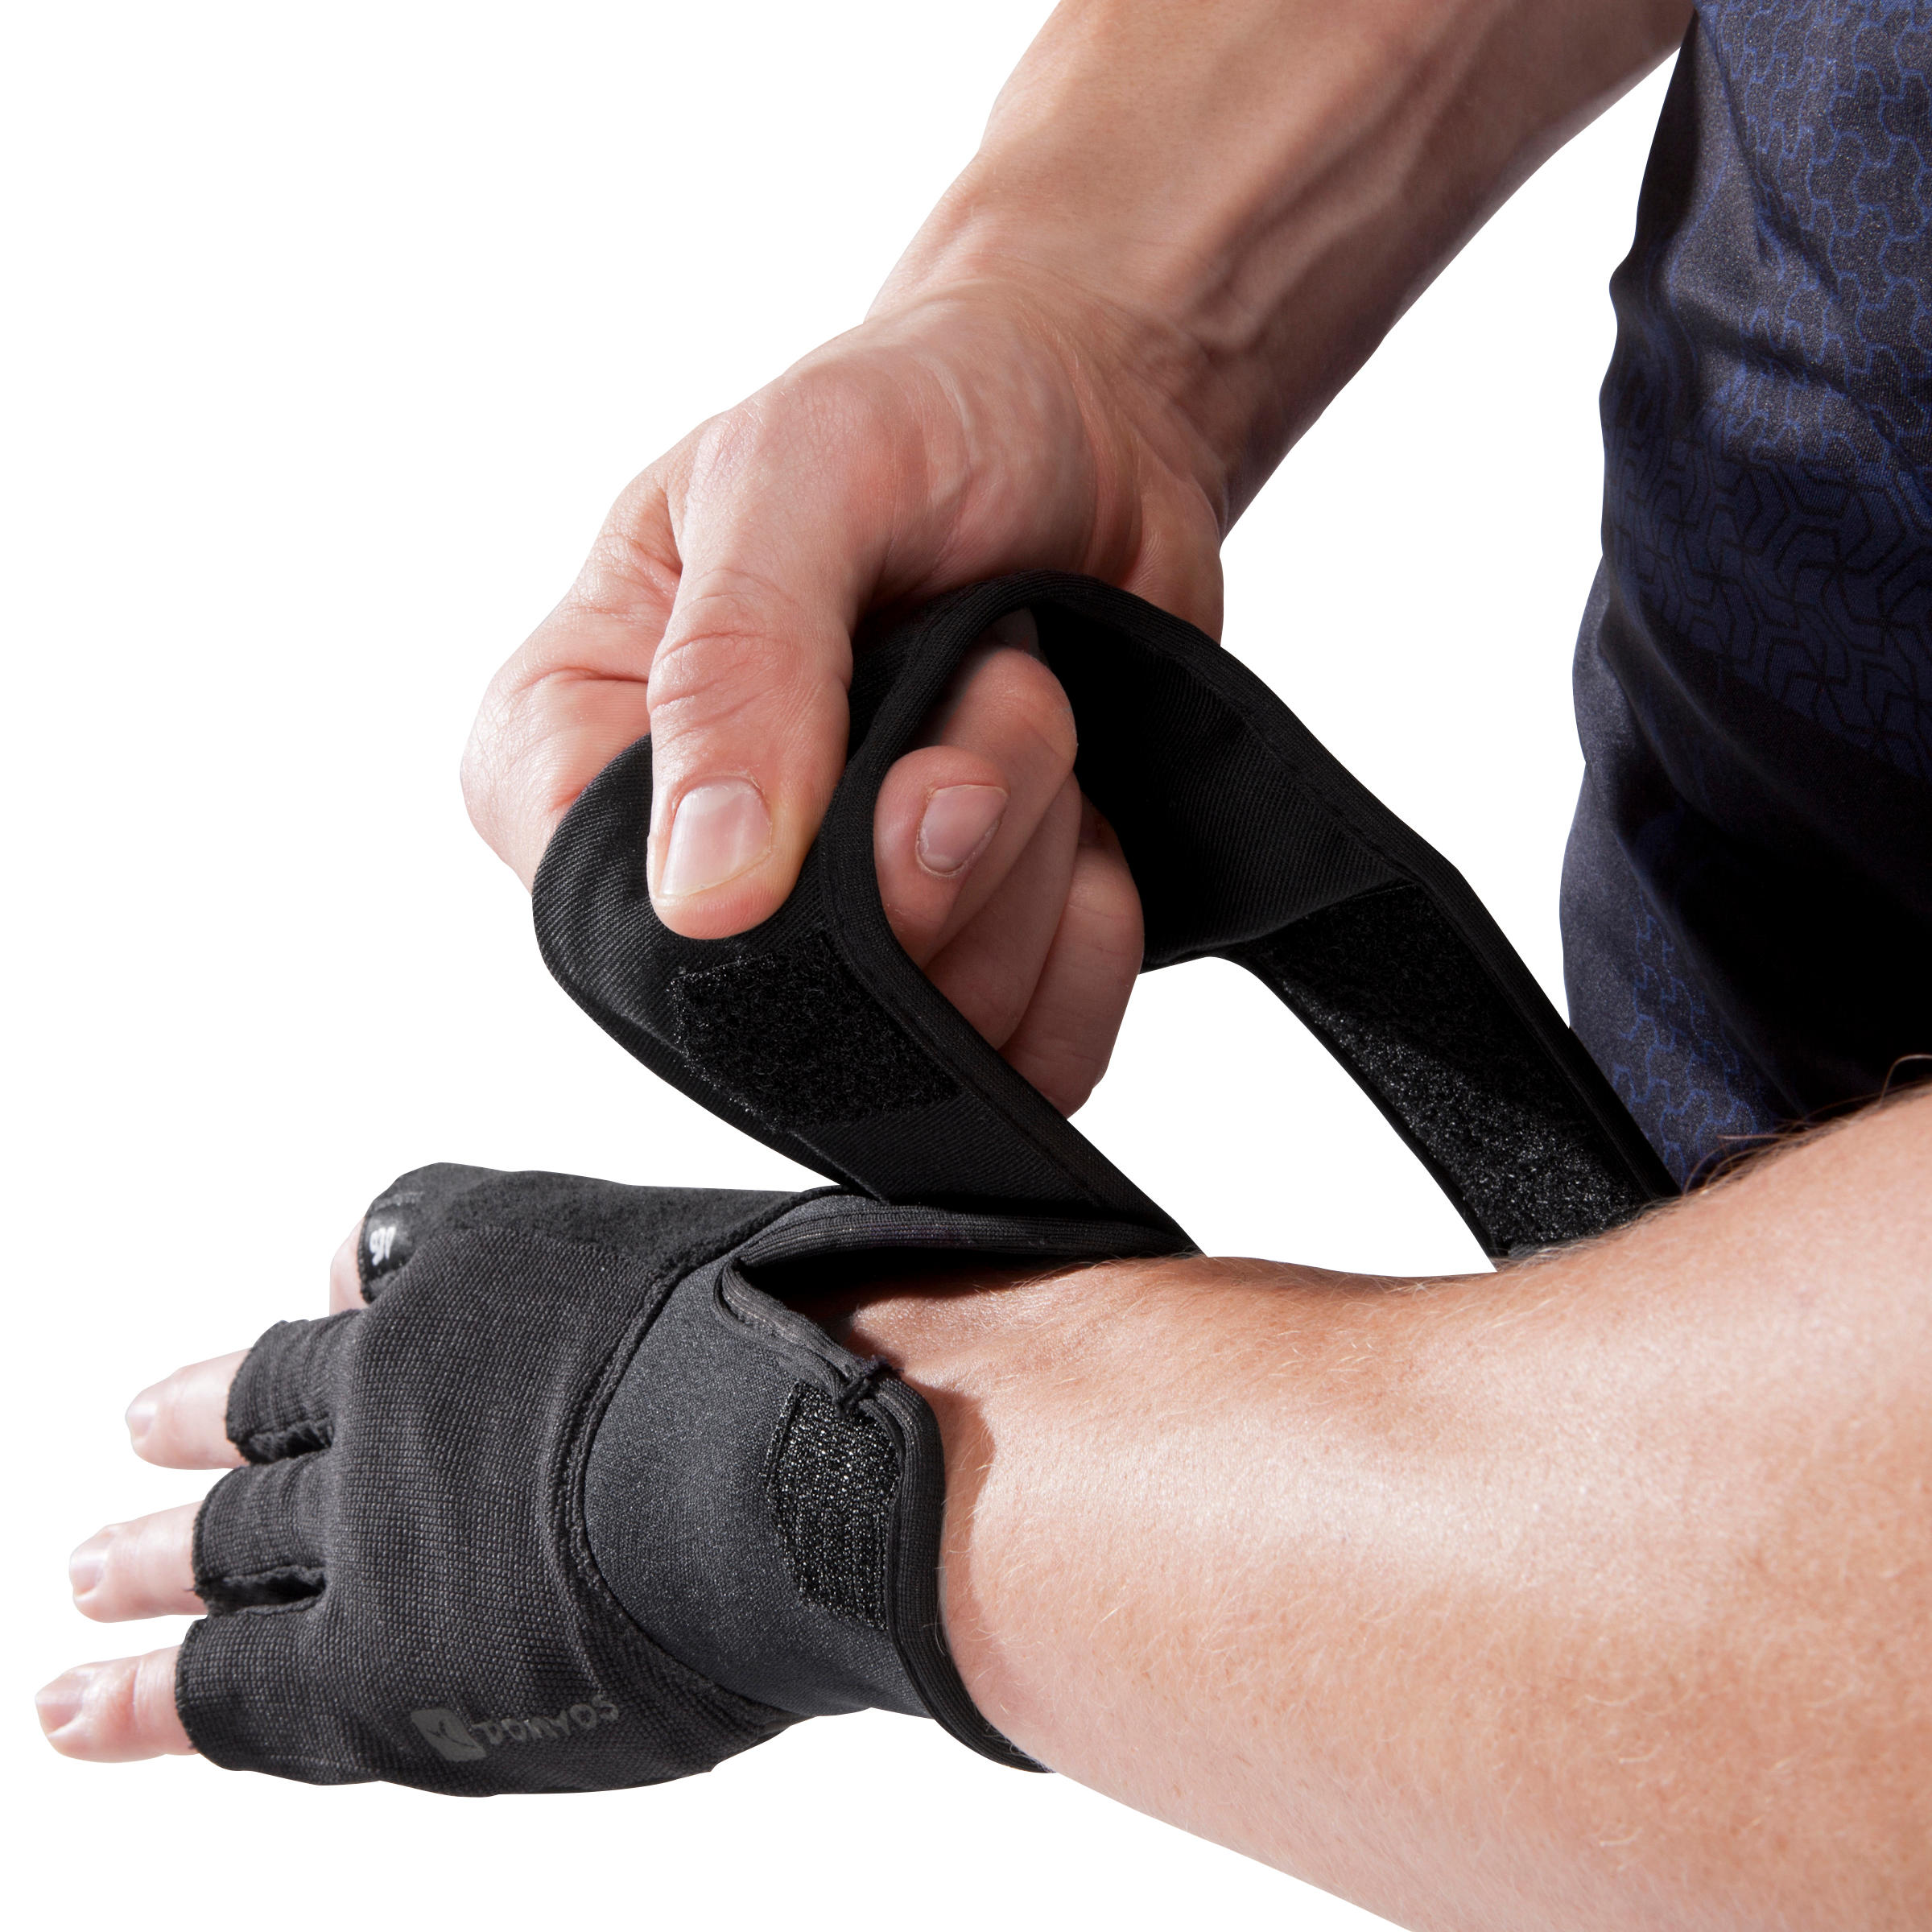 900 Weight Training Glove with Double Rip-Tab Cuff - Black/Grey 3/10